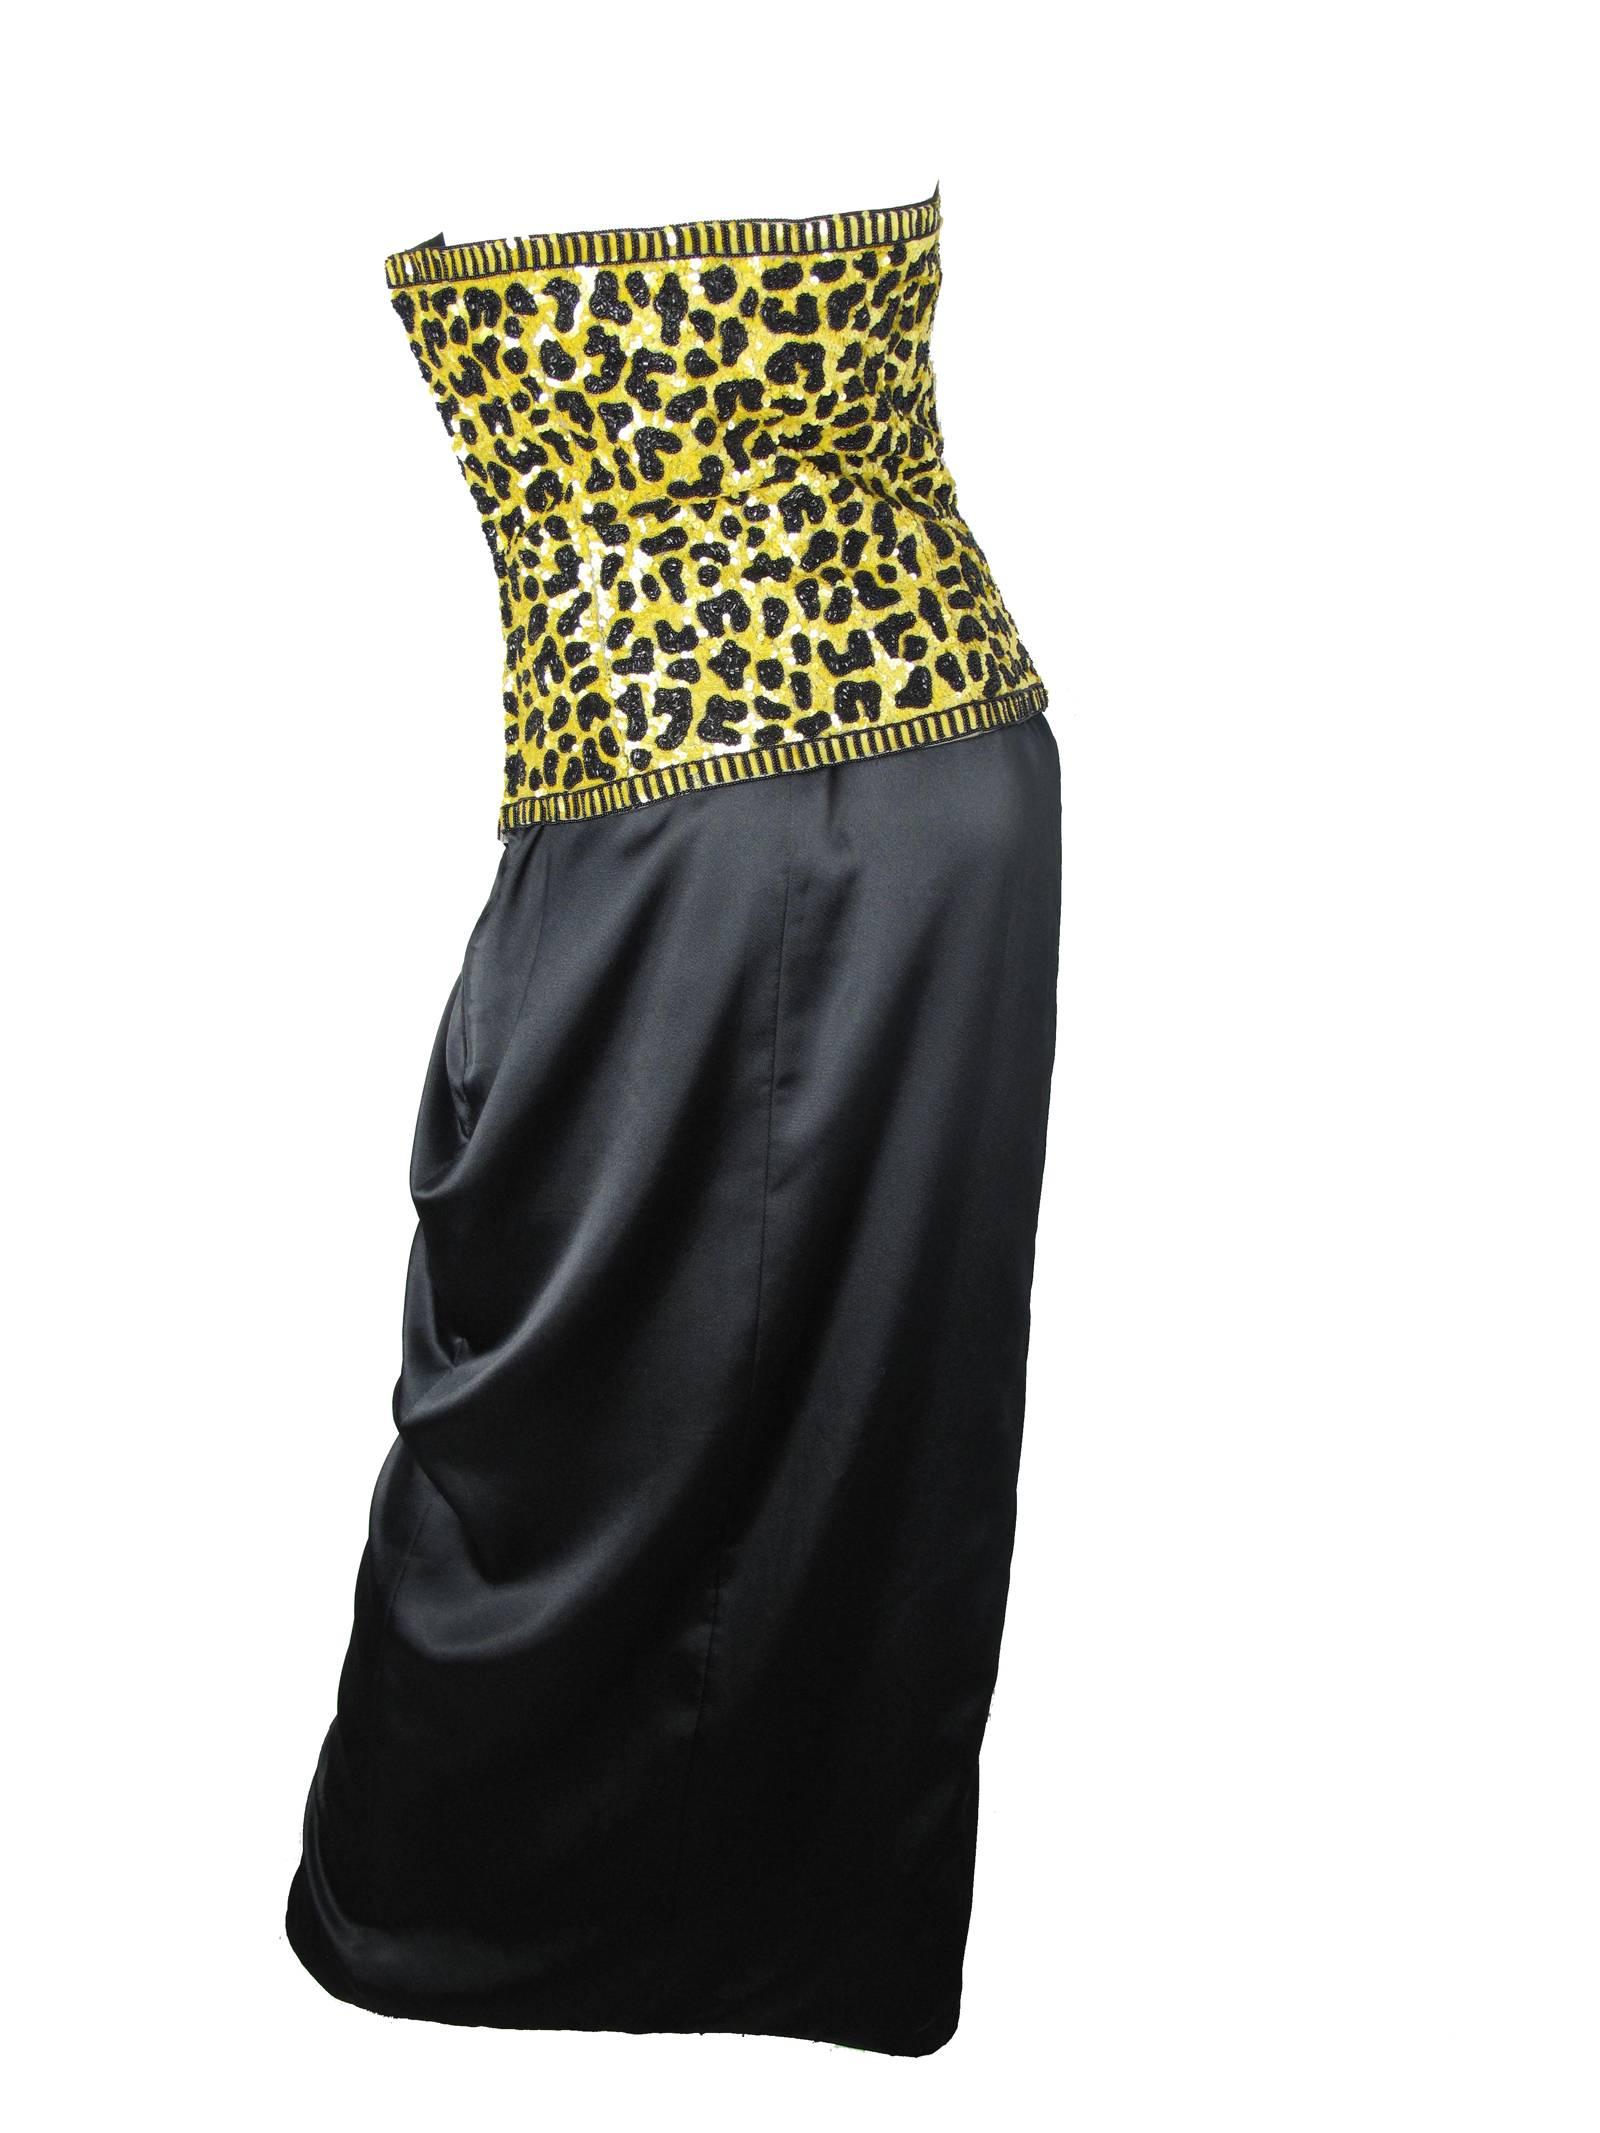 Richelene satin gown with gold and black leopard print sequins and beading.  Condition: Excellent.  Size Medium.  36